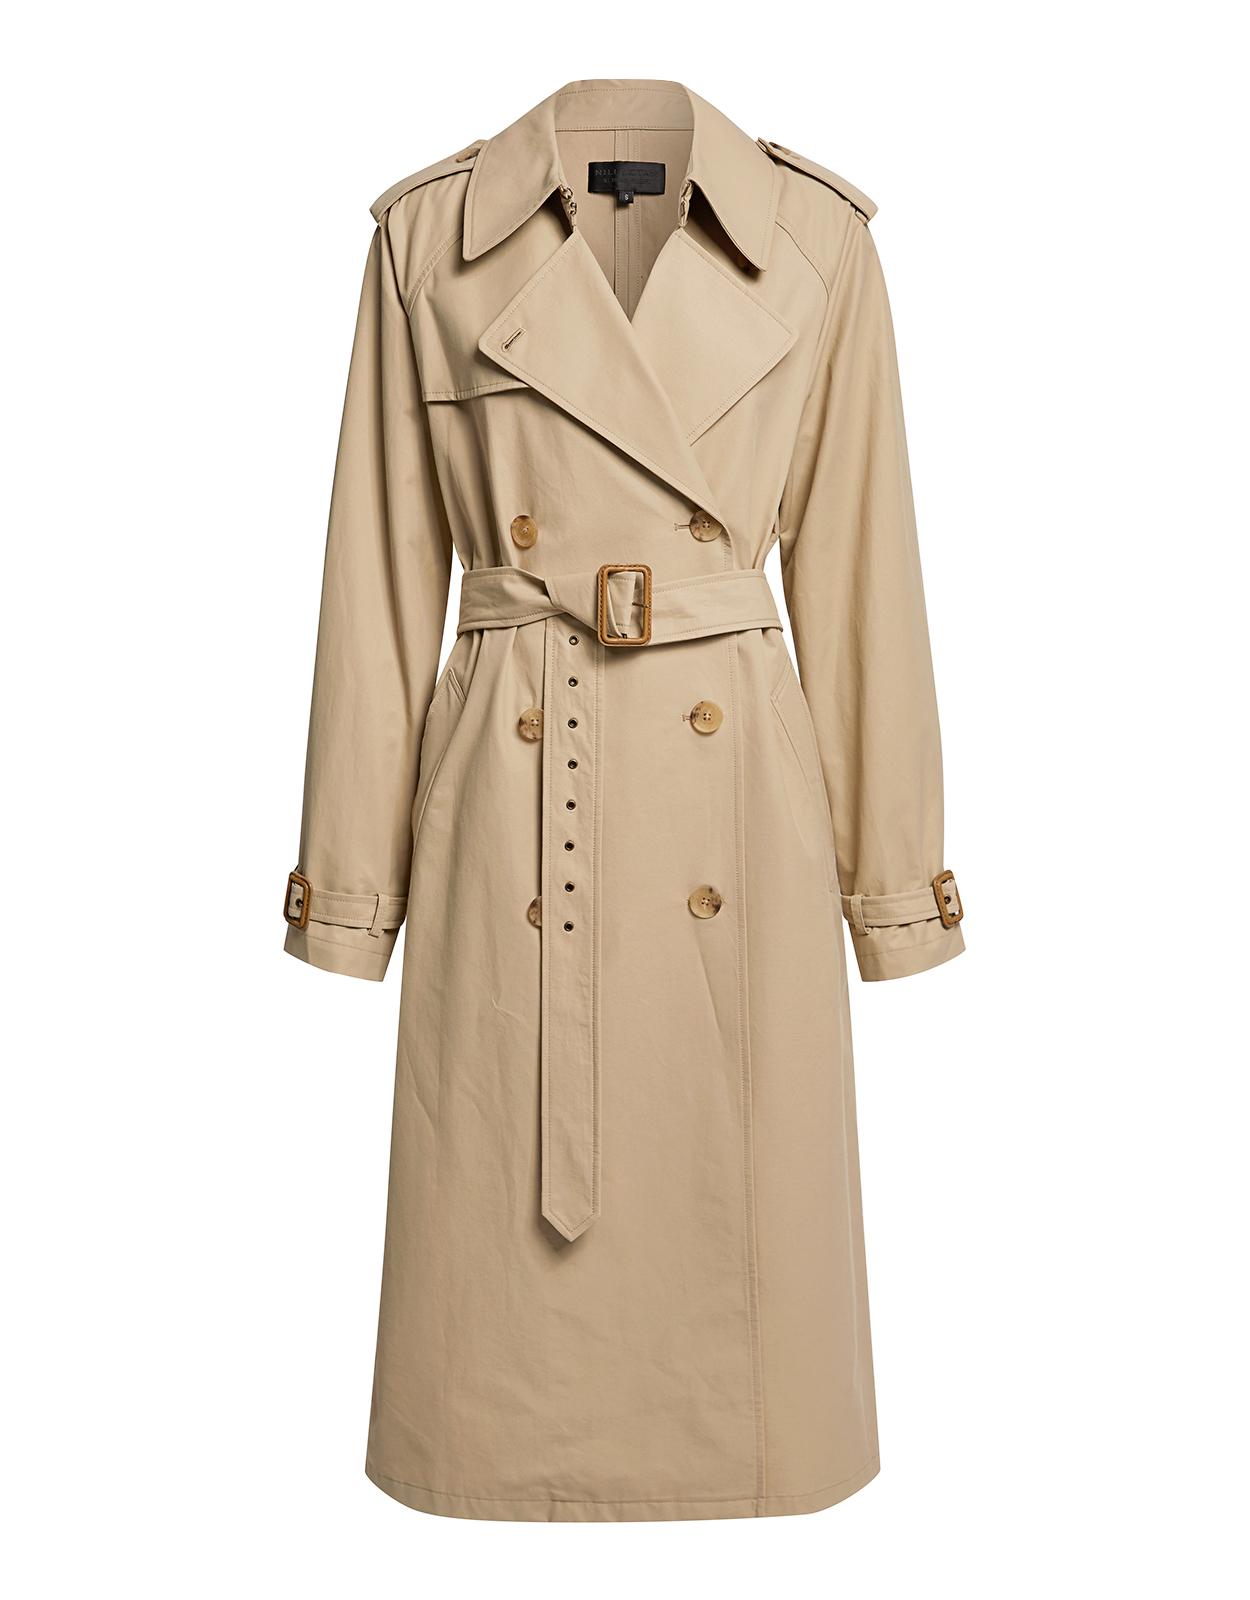 Nili Lotan Cotton Tanner Trench Coat in Natural - Lyst